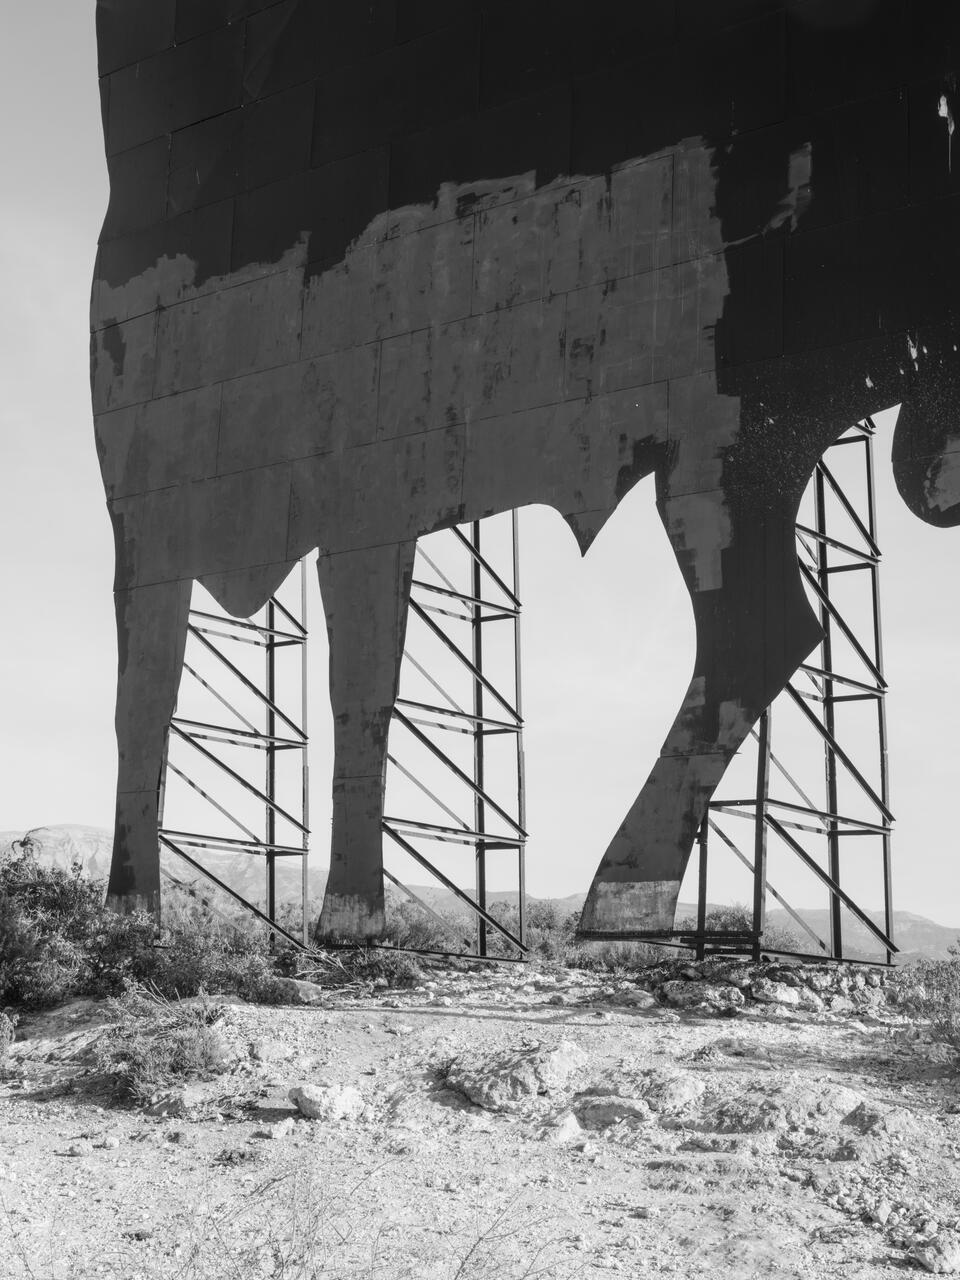 Black and white photograph of a part of a bull billboard located in Spain